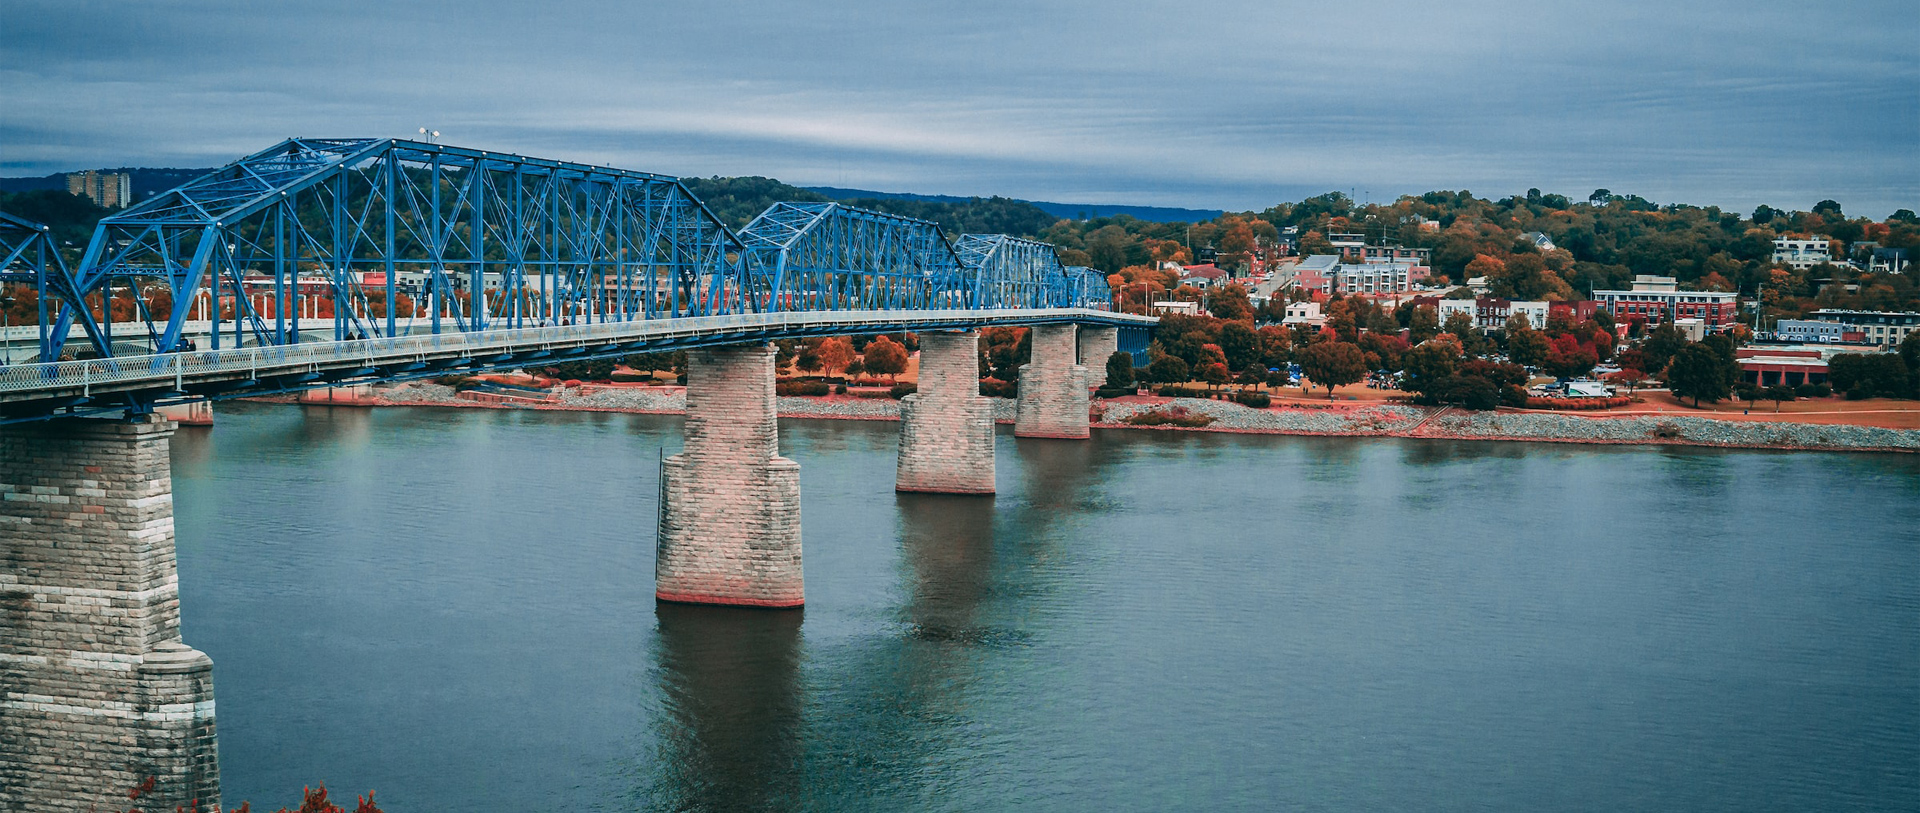 pictured: the Chattanooga waterfront